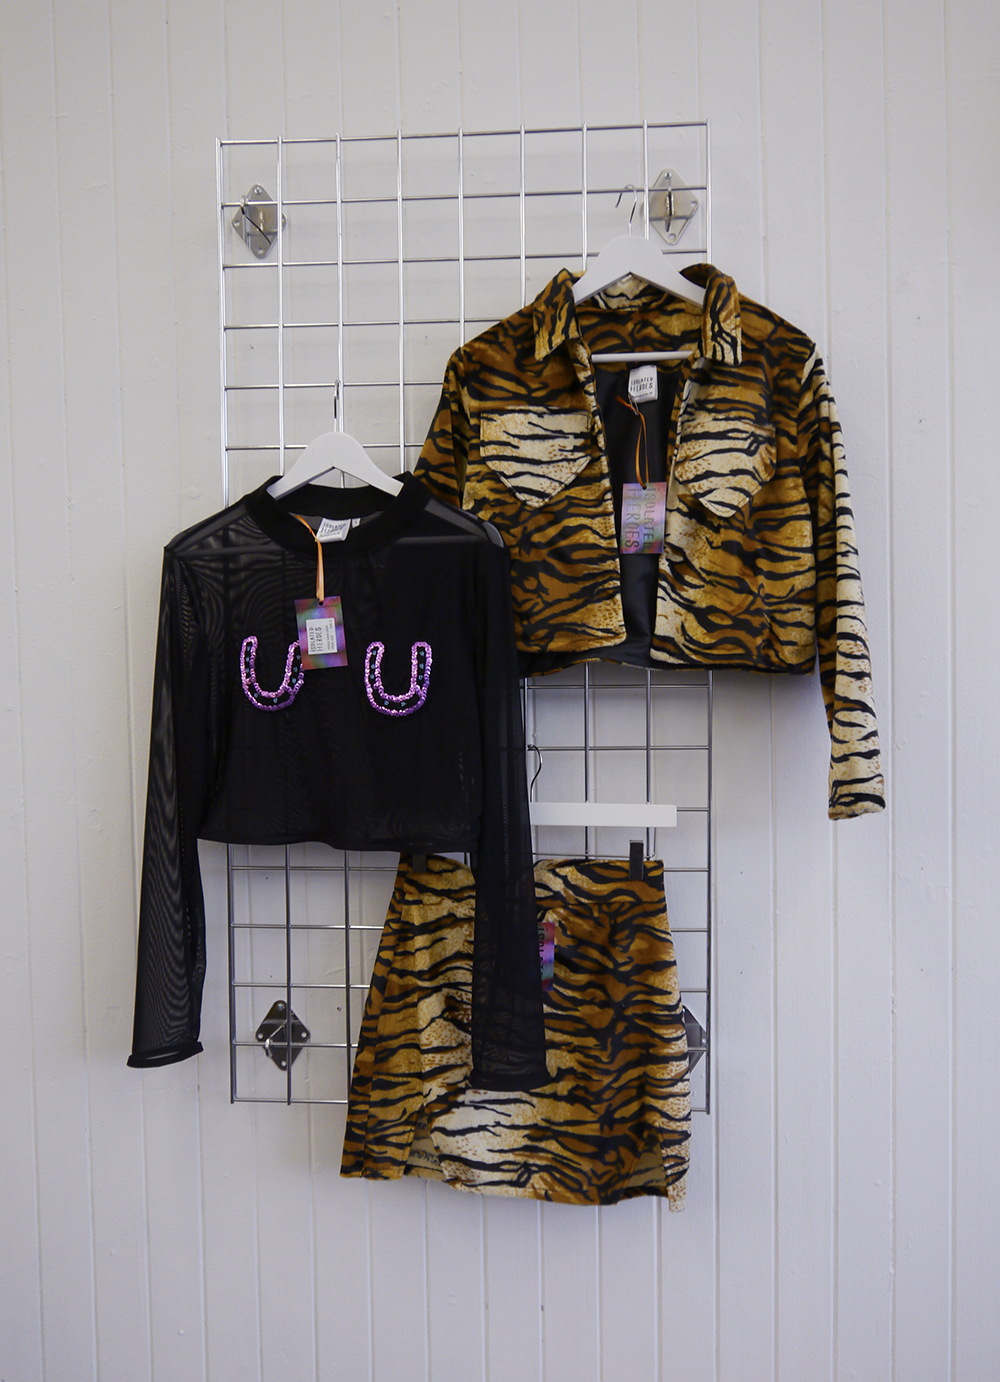 Isolated Heroes, Scottish design, Scottish designer, pop up shop, pop up, Glasgow, South Block, Scottish blogger, Dundee designer, Nevada collection, luxury street wear, sequin dress, The Academy of Makeup, Scottish models, new collection, sequins, tiger print, sequin horse shoes, crop top